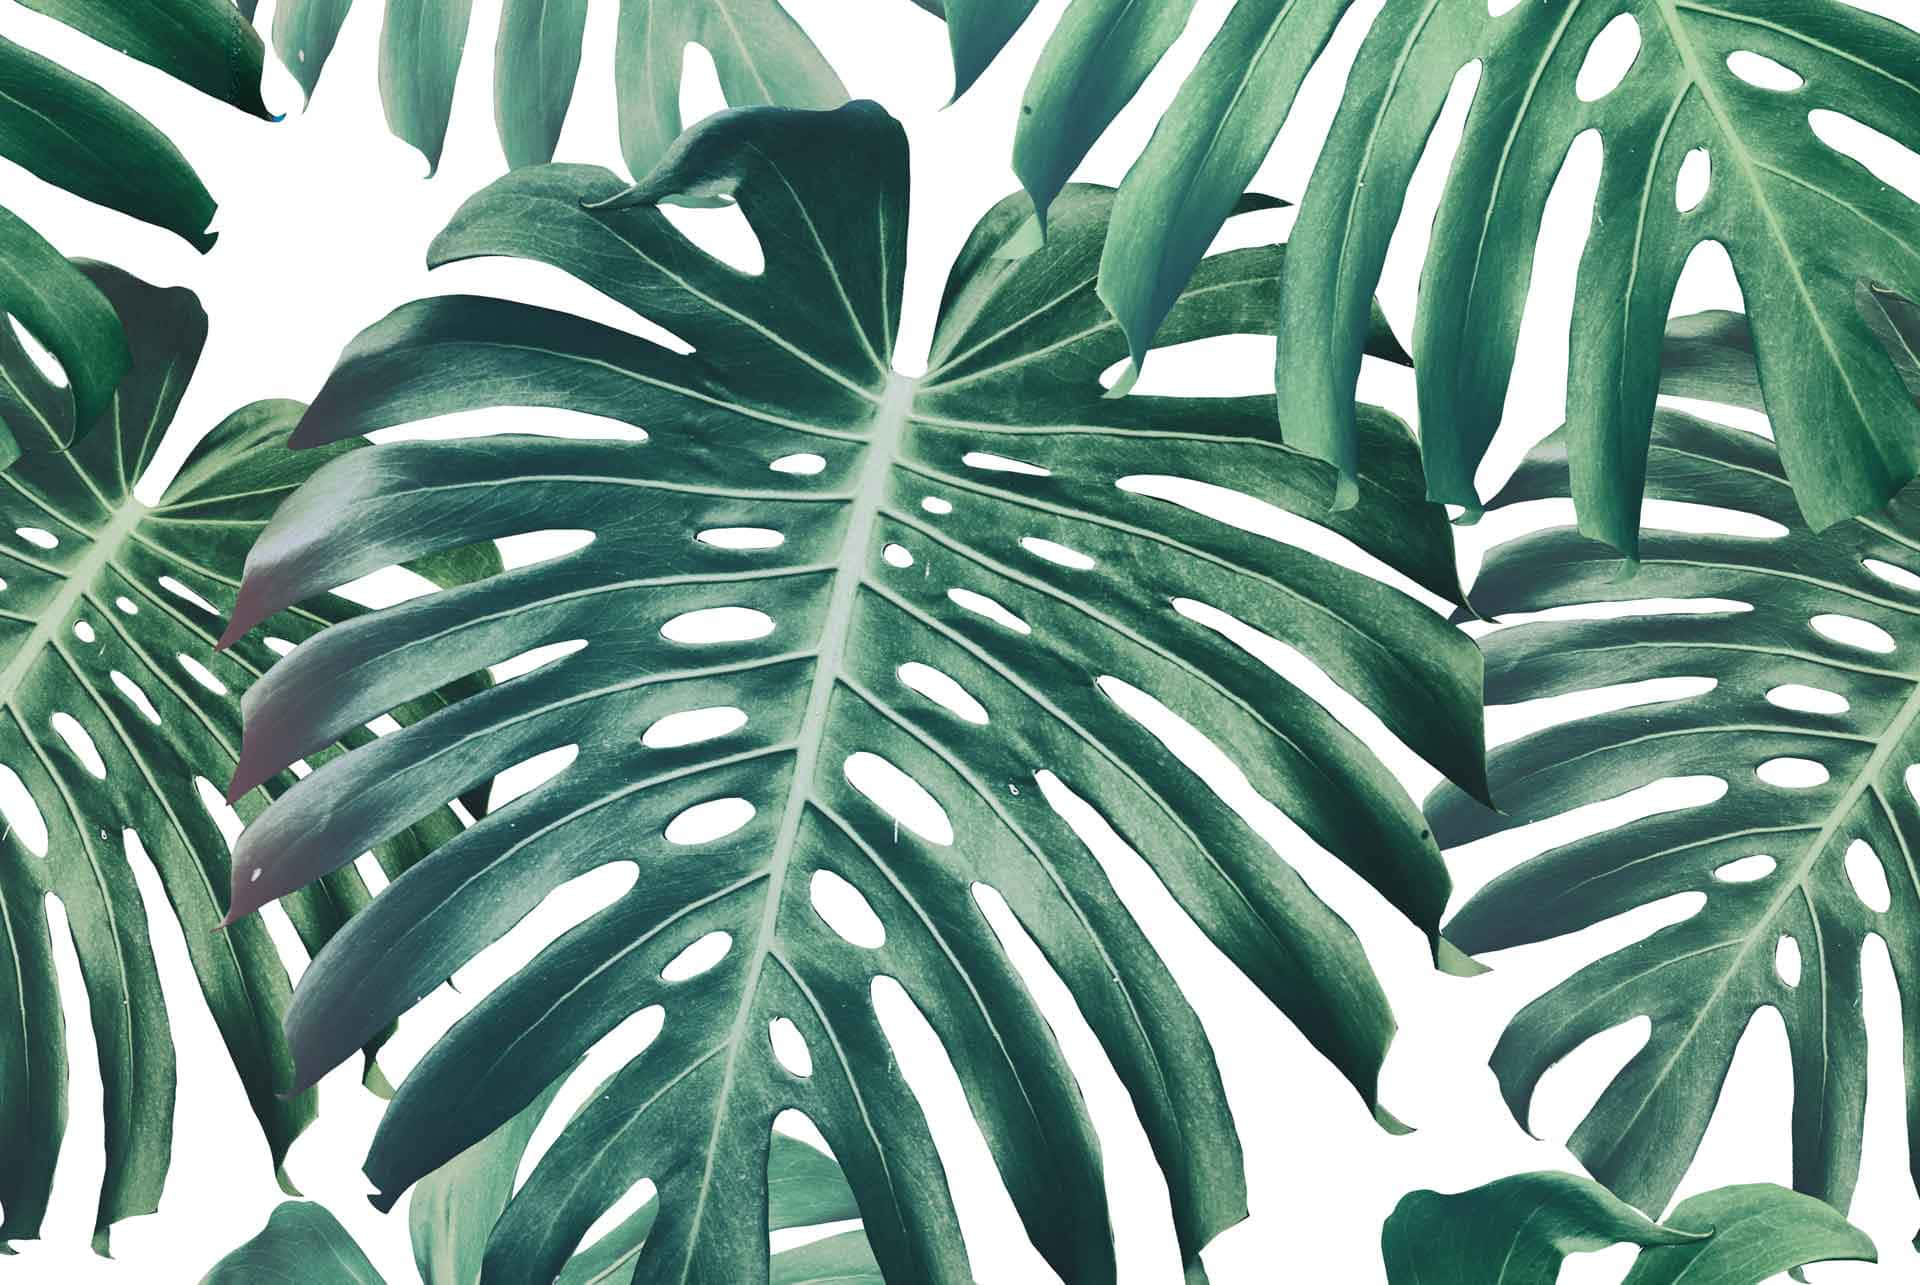 Enjoy the beauty and tranquility of Monstera